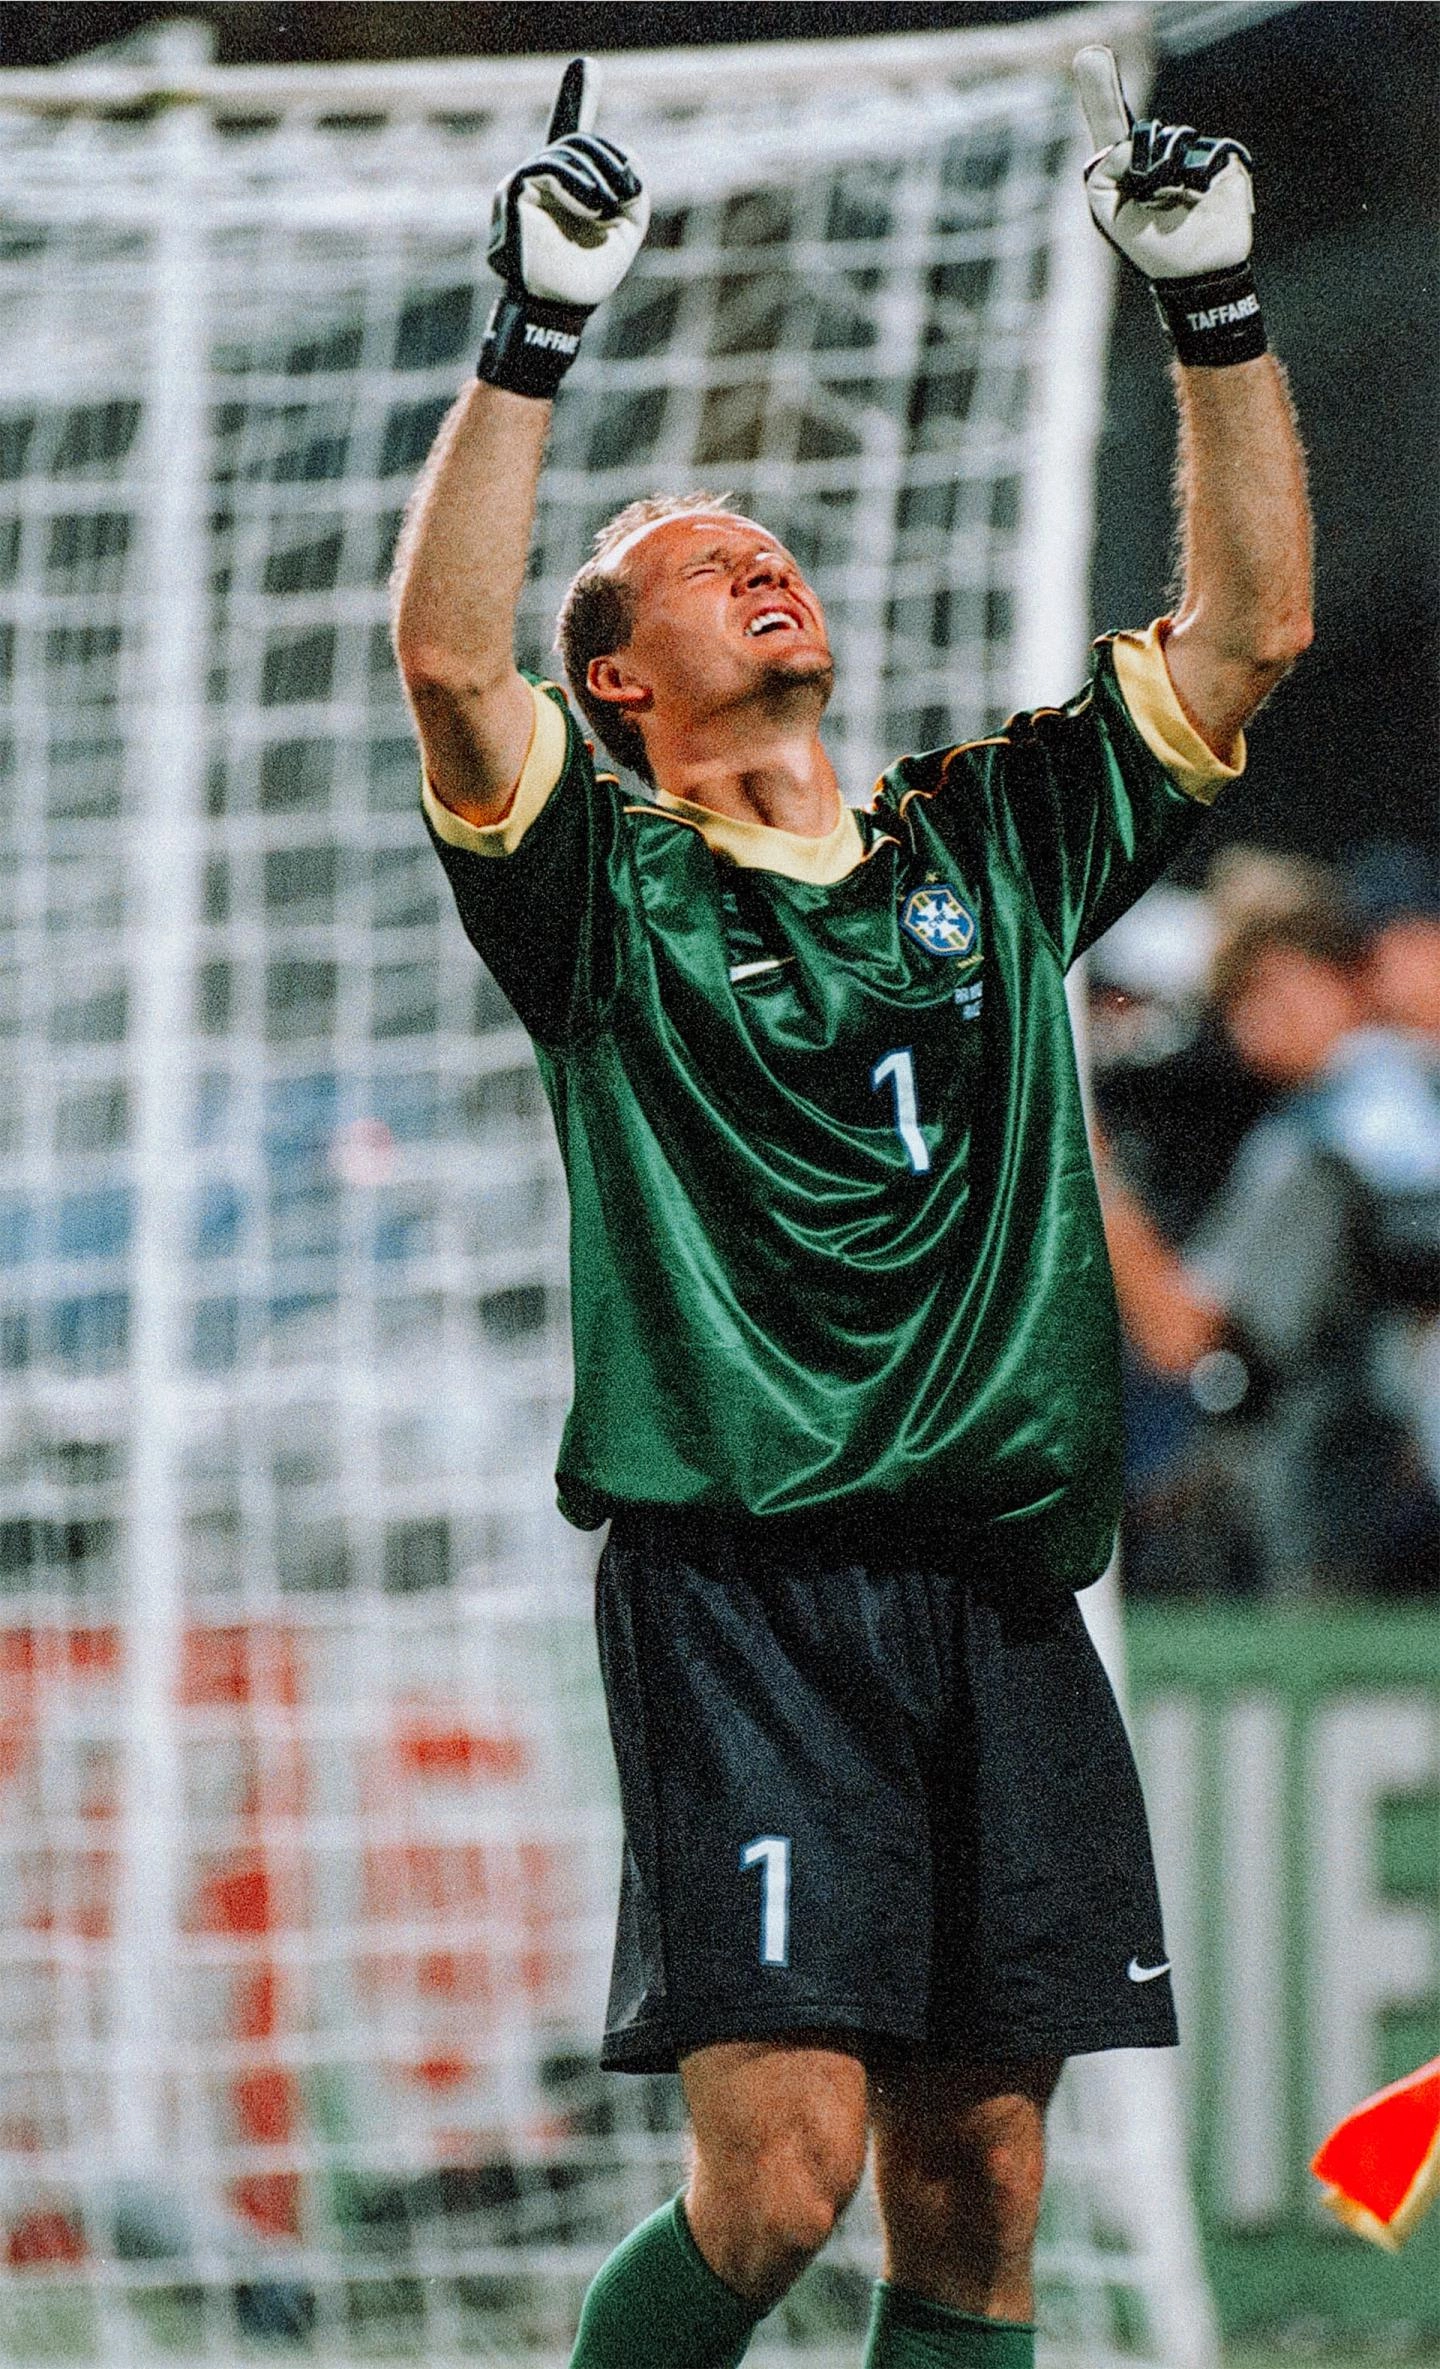 Taffarel was Brazil's hero in the '98 semi-final - but France would prevail in the final